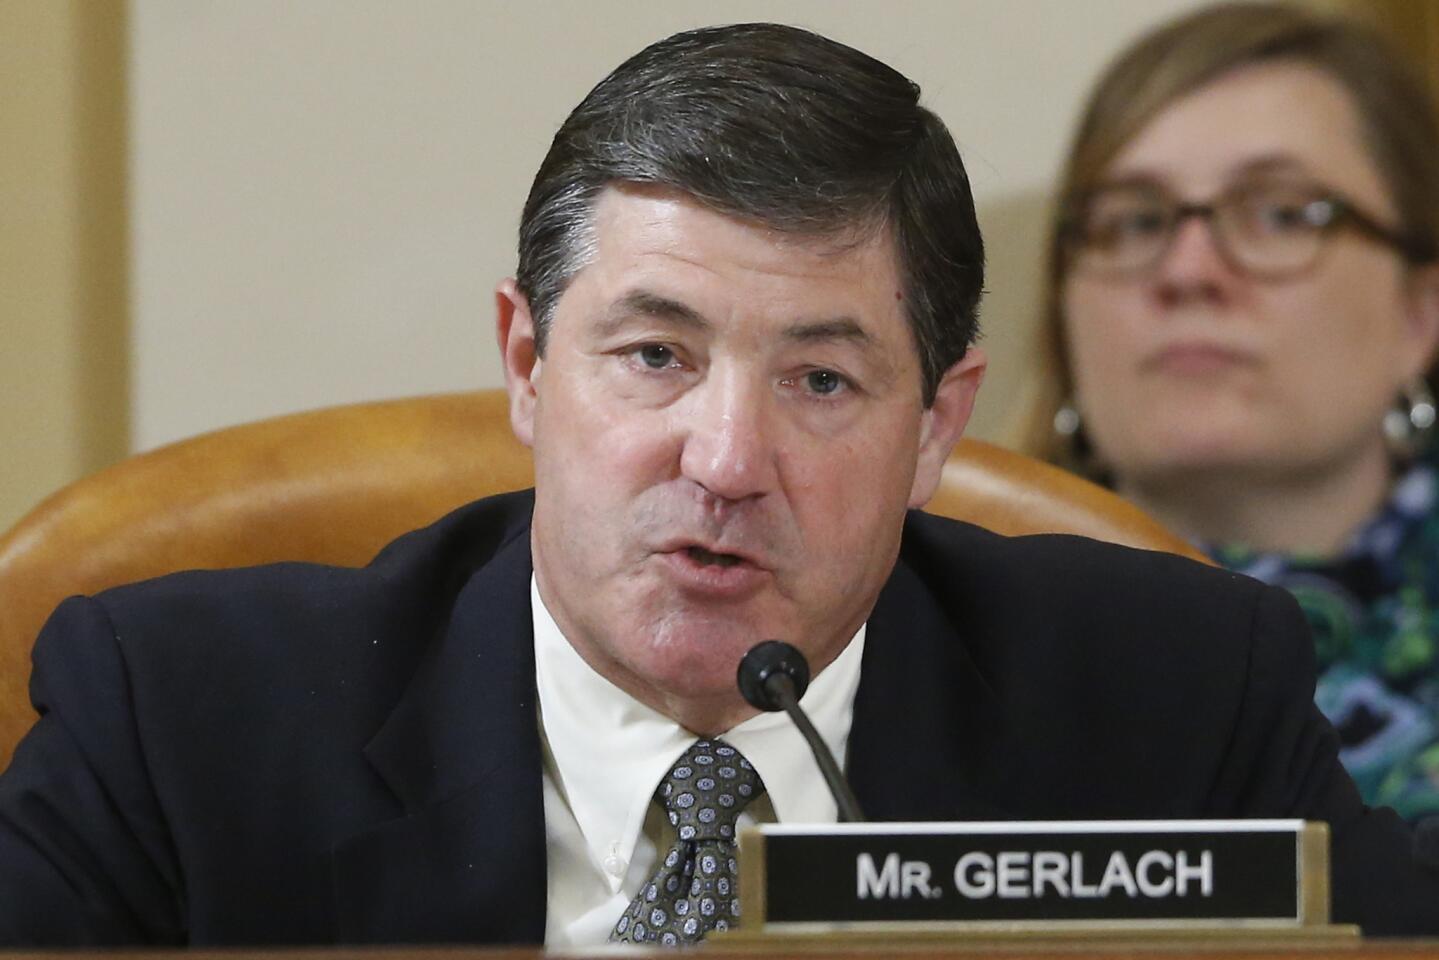 Six-term Rep. Jim Gerlach (R-Penn.), the founder of the House Land Conservation Caucus, announced Jan. 6 that he would retire from the House at the end of his term. "It is simply time for me to move on to new challenges and to spend more time with my wife and family," Gerlach said.